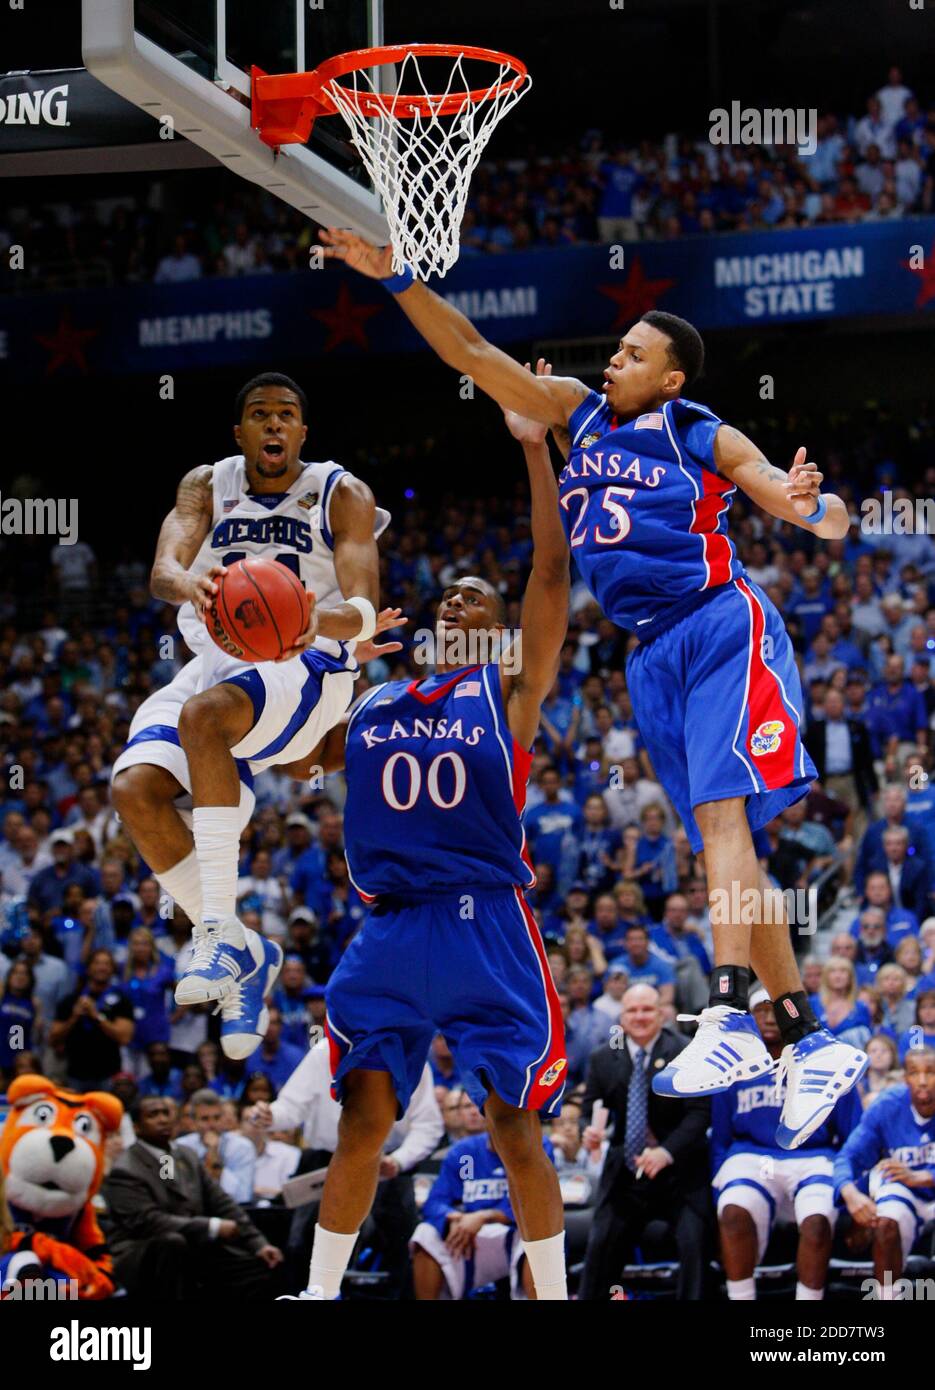 Memphis' Chris Douglas-Roberts (14) works his way to the basket against Kansas' Brandon Rush (25) and Darrell Arthur (00) during second half action in the NCAA Men's Basketball Championship game at the Alamodome in San Antonio, TX, USA, April 07, 2008. Kansas won 75-68. Photo by Harry E. Walker/MCT/Cameleon/ABACAPRESS.COM Stock Photo